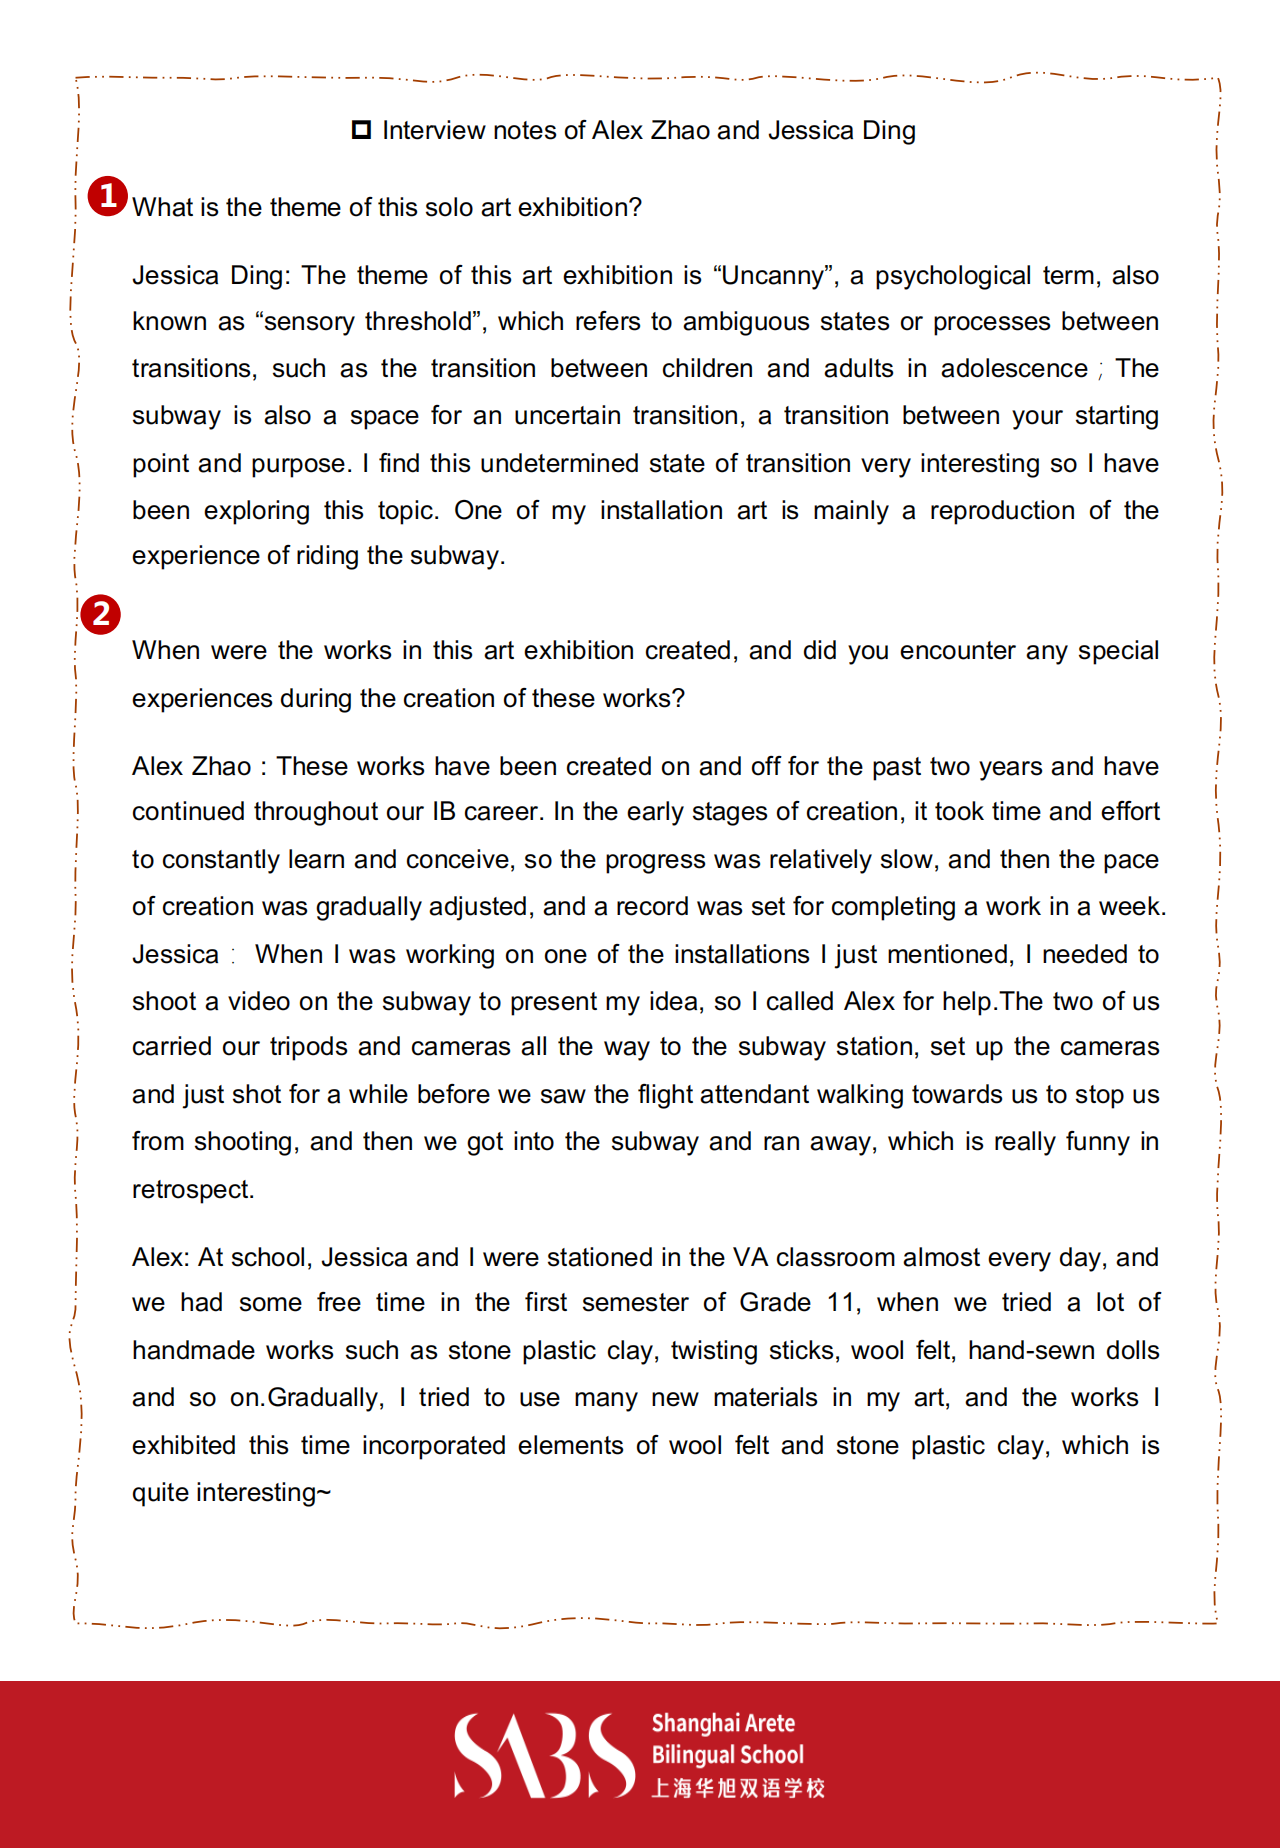 HS 2nd Issue Newsletter pptx（英文）_18.png